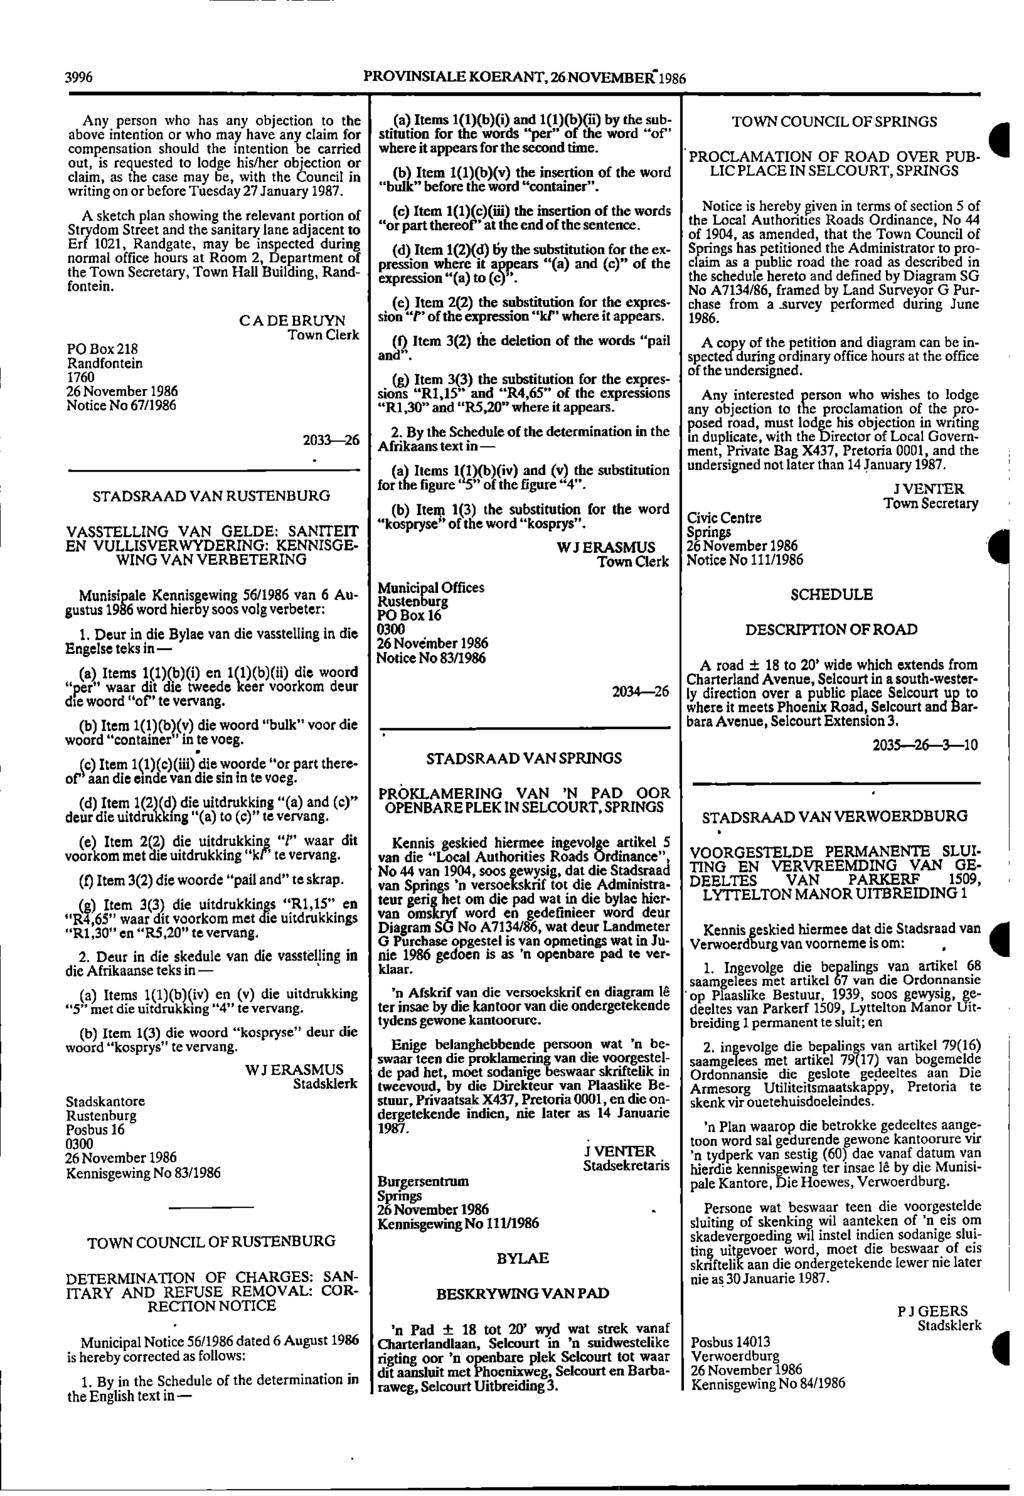 3996 PROVINSIALE KOERANT, 26 NOVEMBER1986 Any person who has any objection to the (a) Items 1(1)(b)(i) and 1(1)(b)(ii) by the sub TOWN COUNCIL OF SPRINGS above intention or who may have any claim for